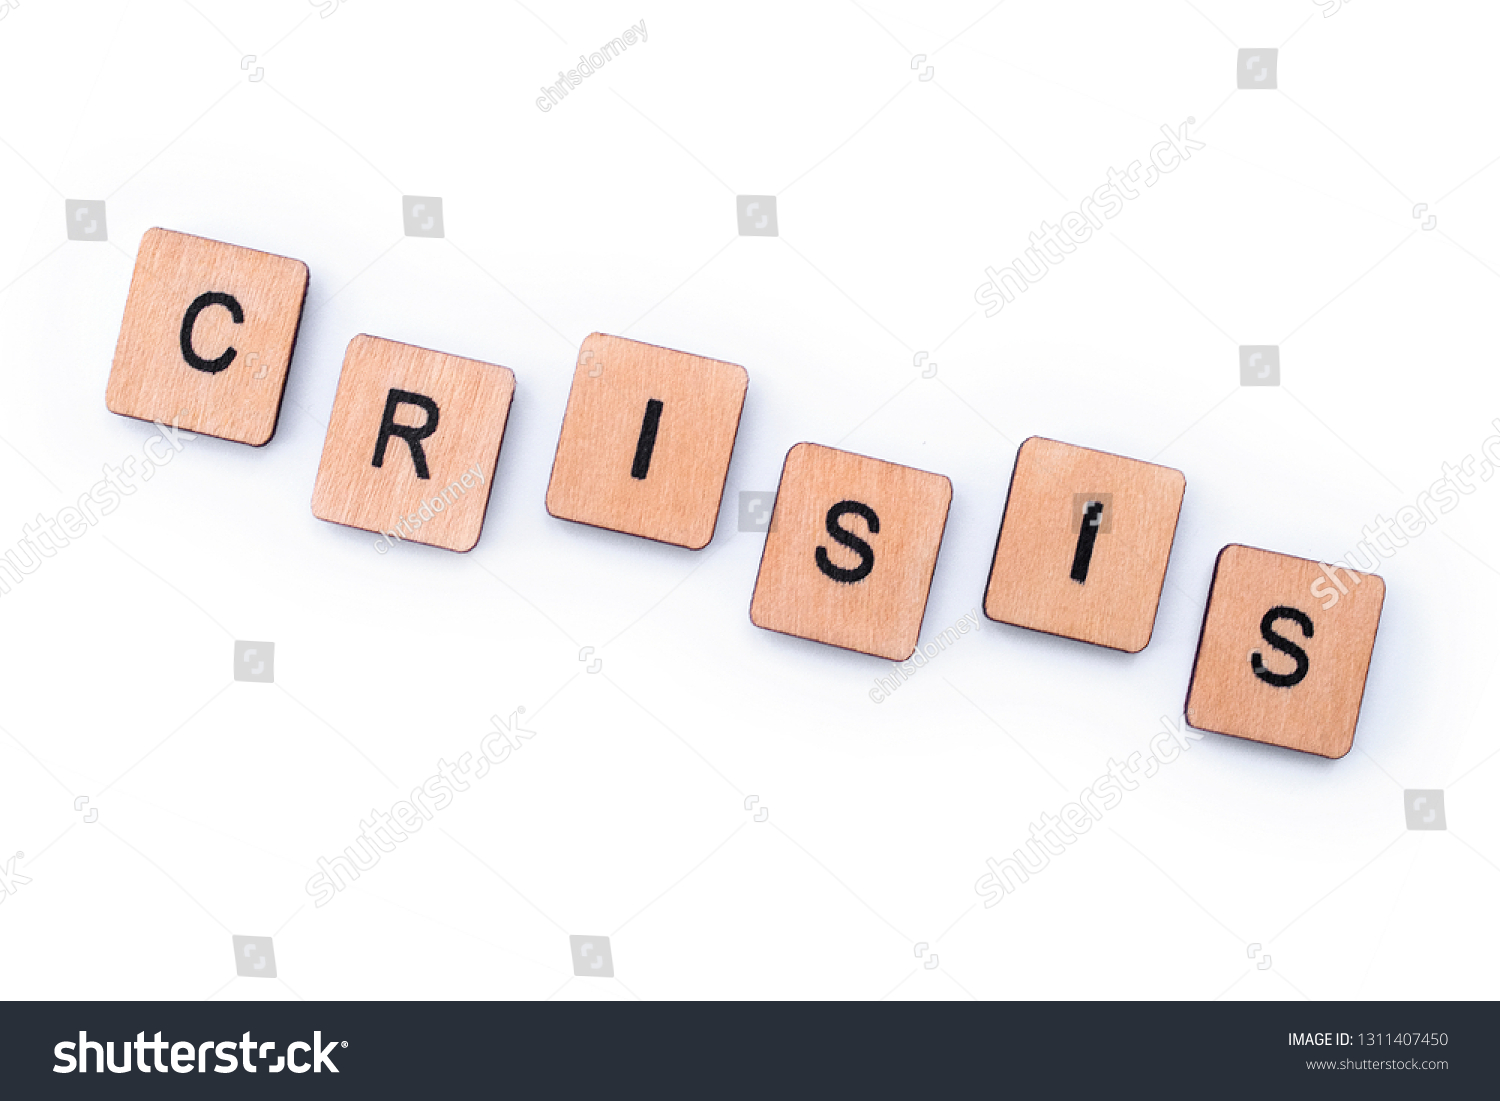 The word CRISIS, spelt with wooden letter tiles. #1311407450